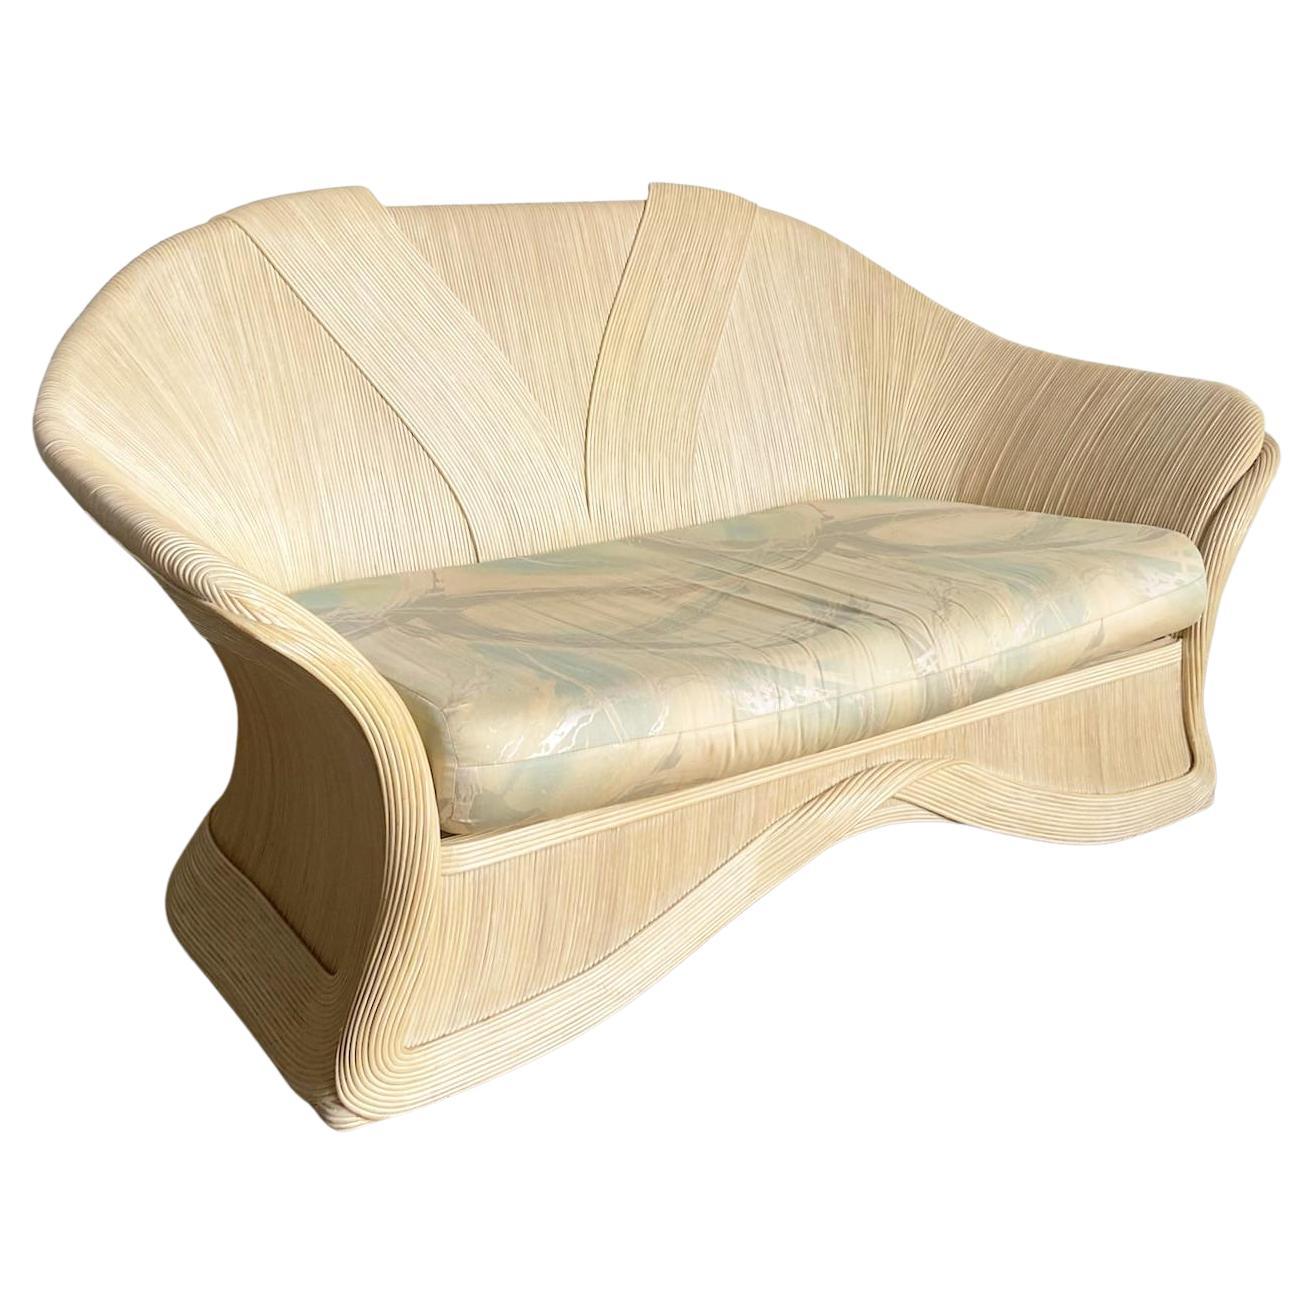 Boho Chic Sculpted Pencil Reed Ribbon Love Seat Sofa For Sale